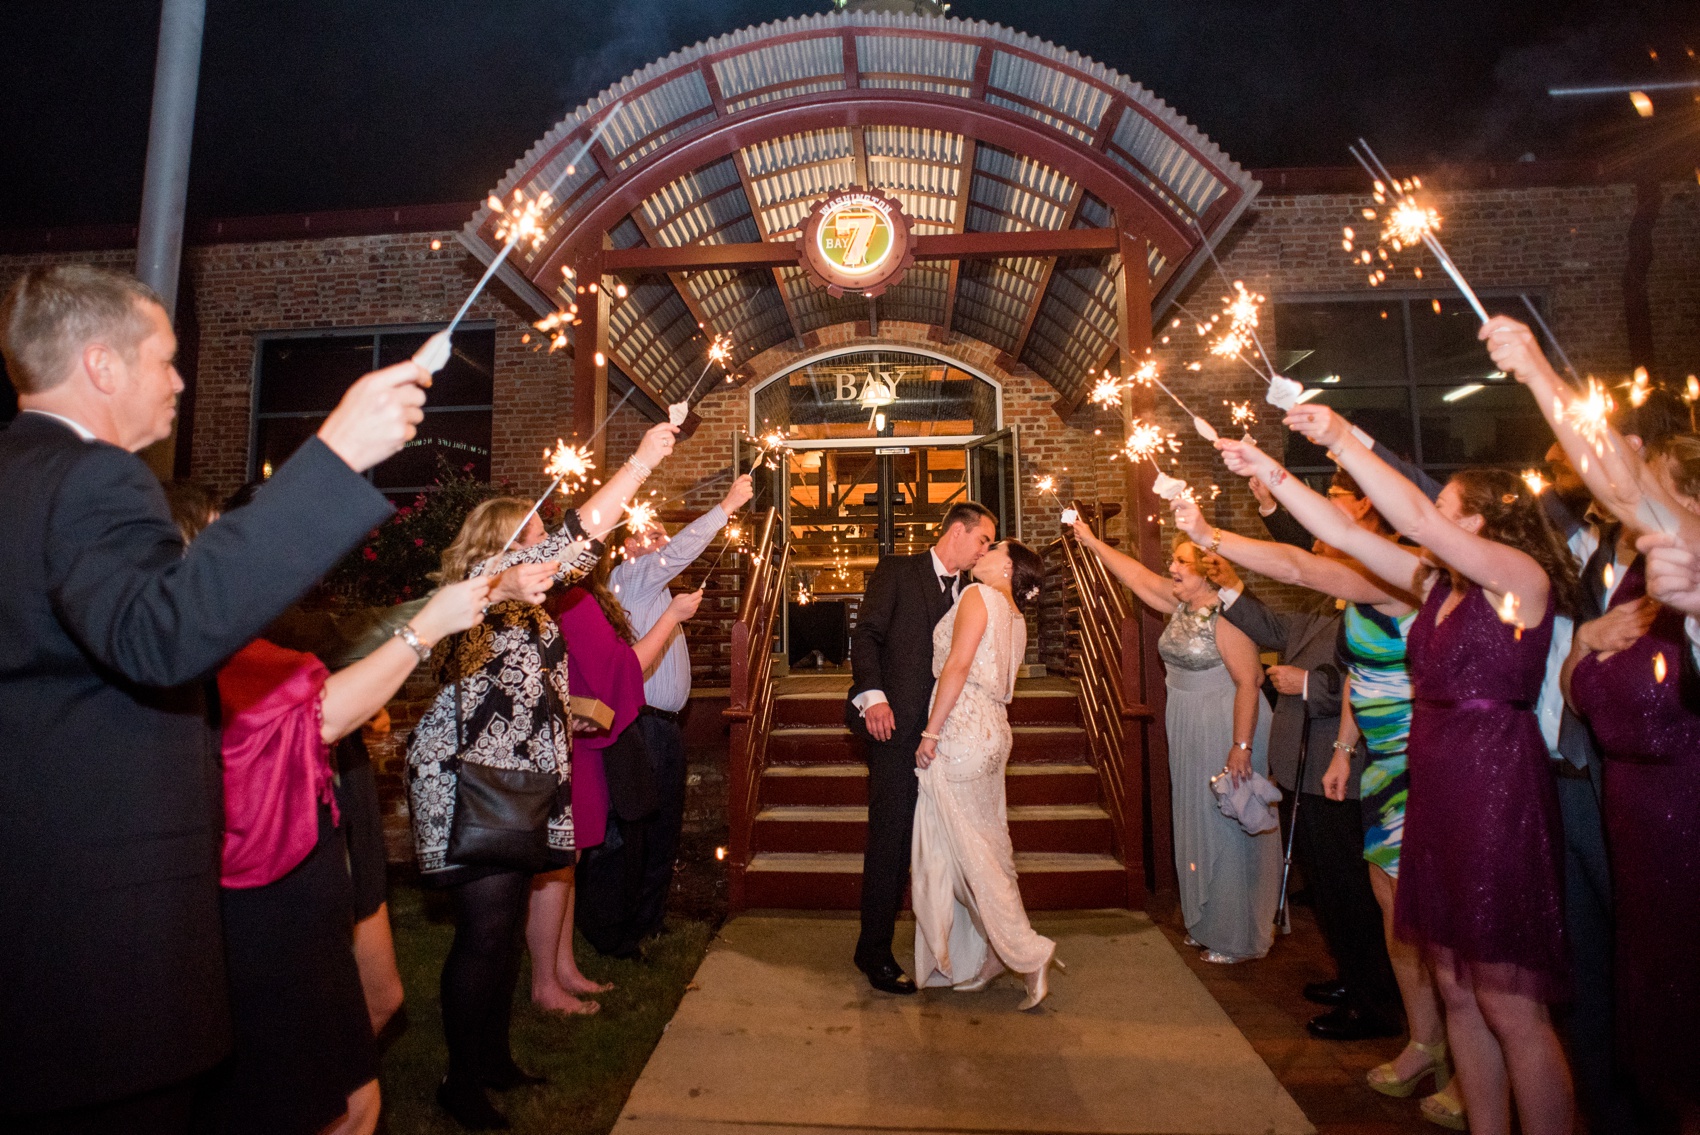 Bay 7 wedding photos by Mikkel Paige Photography. Raleigh wedding photographer captures a black and crystal indoor romantic art deco reception and sparkler exit.